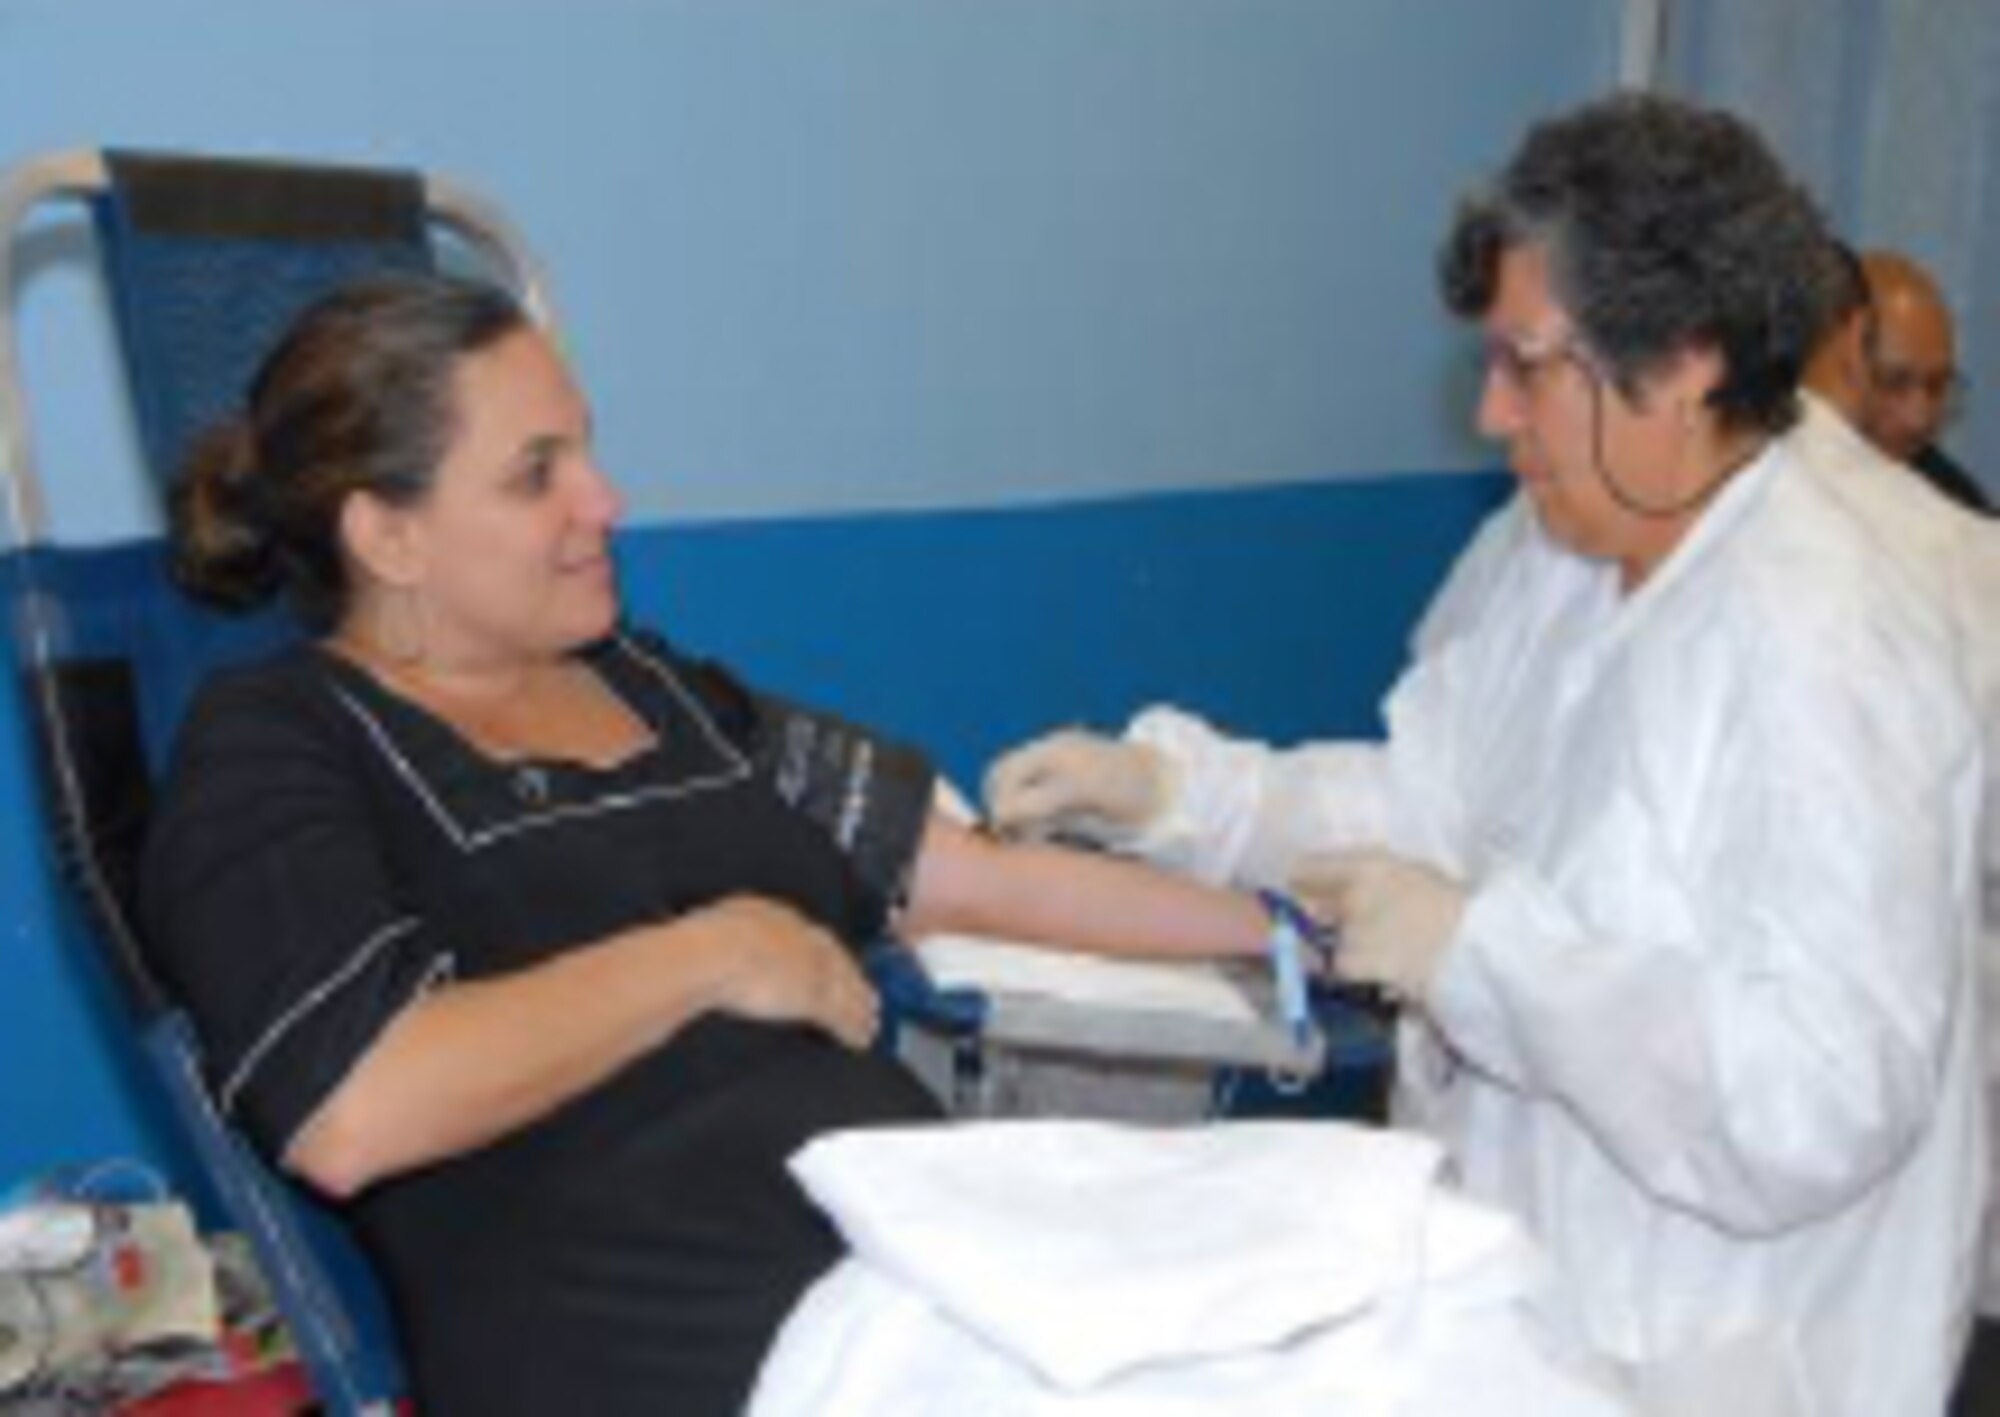 The American Red Cross chapter of Puerto Rico, carried out a blood harvesting session in Muñiz Air National Guard Base in Carolina. This activity took place as part of National Guard Week celebrations from 8 to the 12 of Sept..